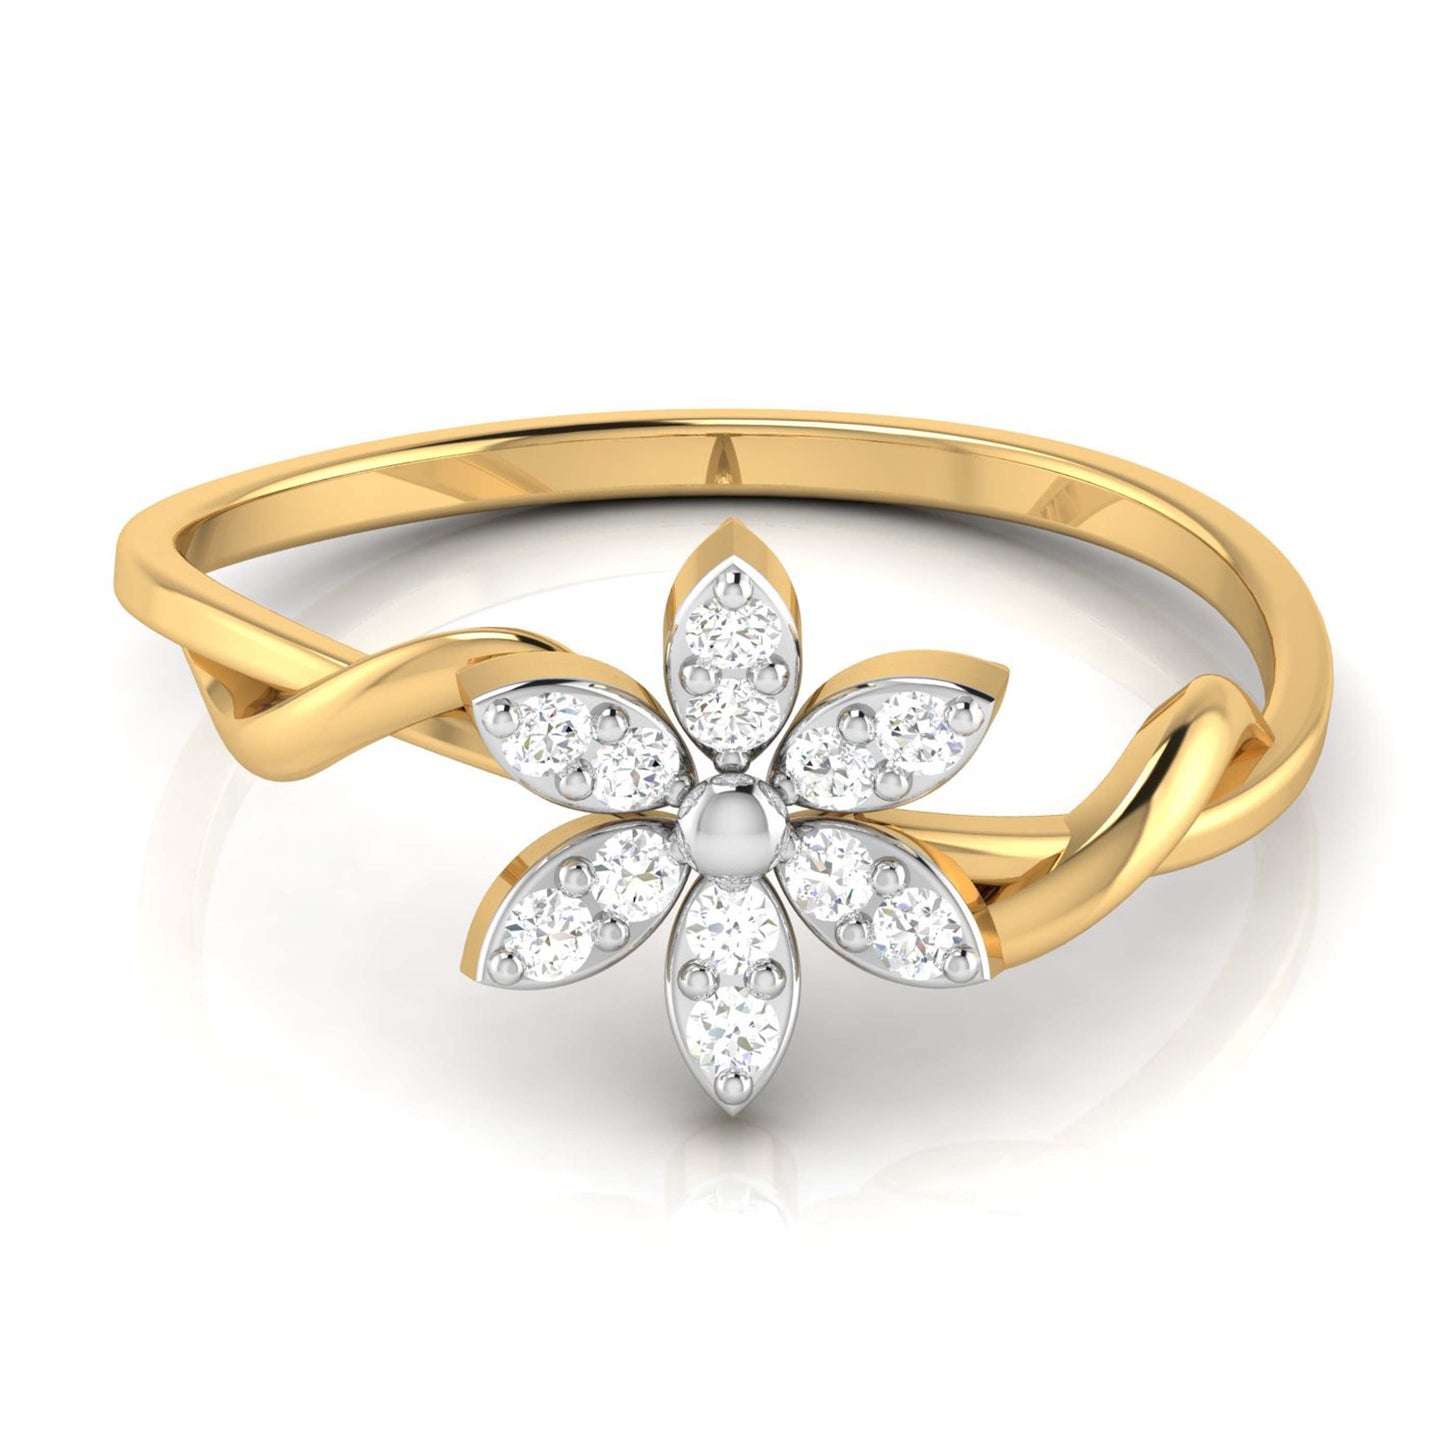 Buy Unique Daily Wear Light Weight Adjustable Queen Ring Design for Ladies